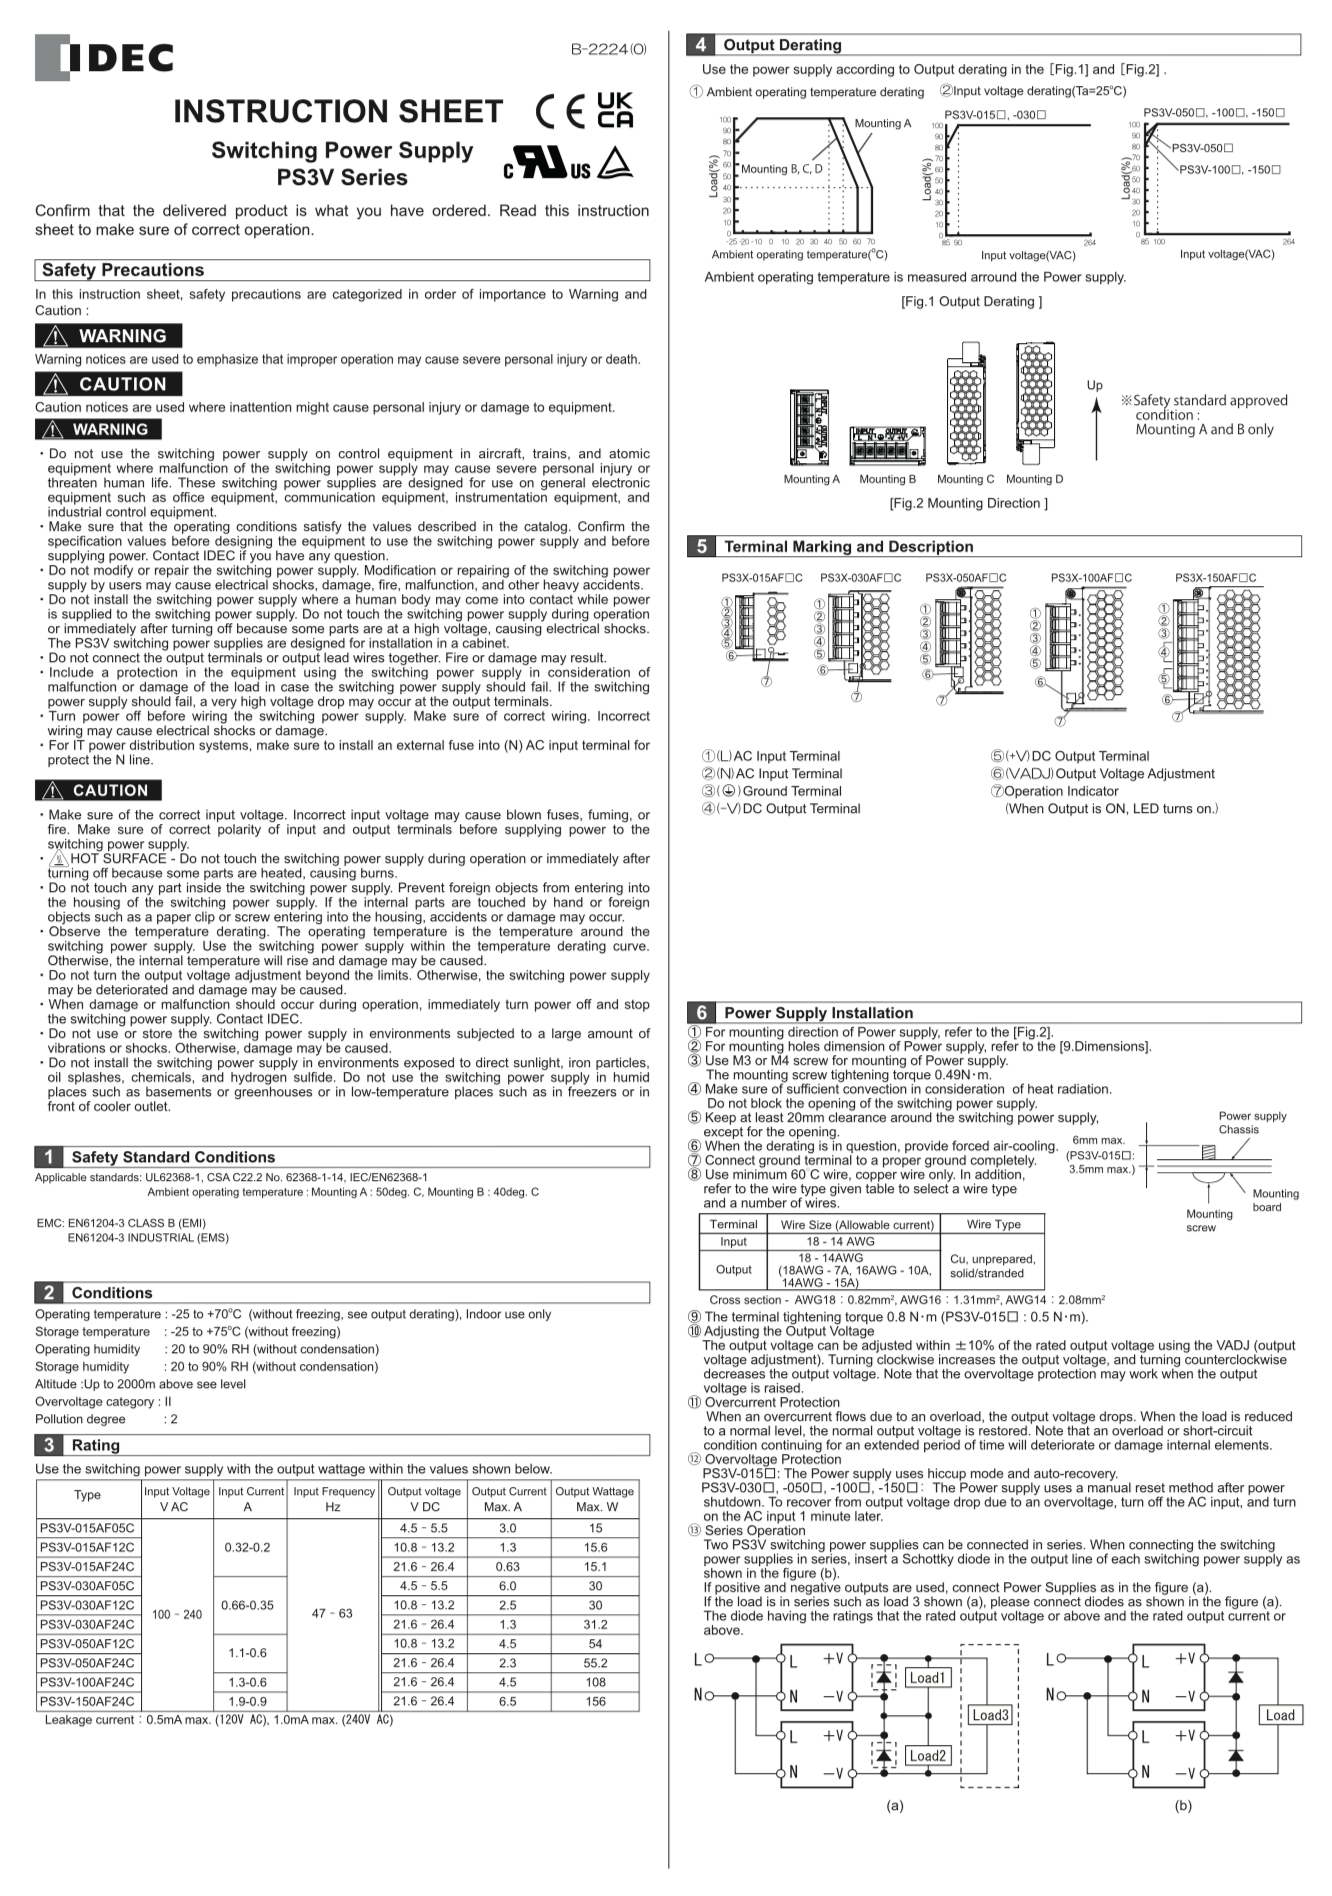 IDEC PS3V Series Switching Power Supply Instruction Sheet